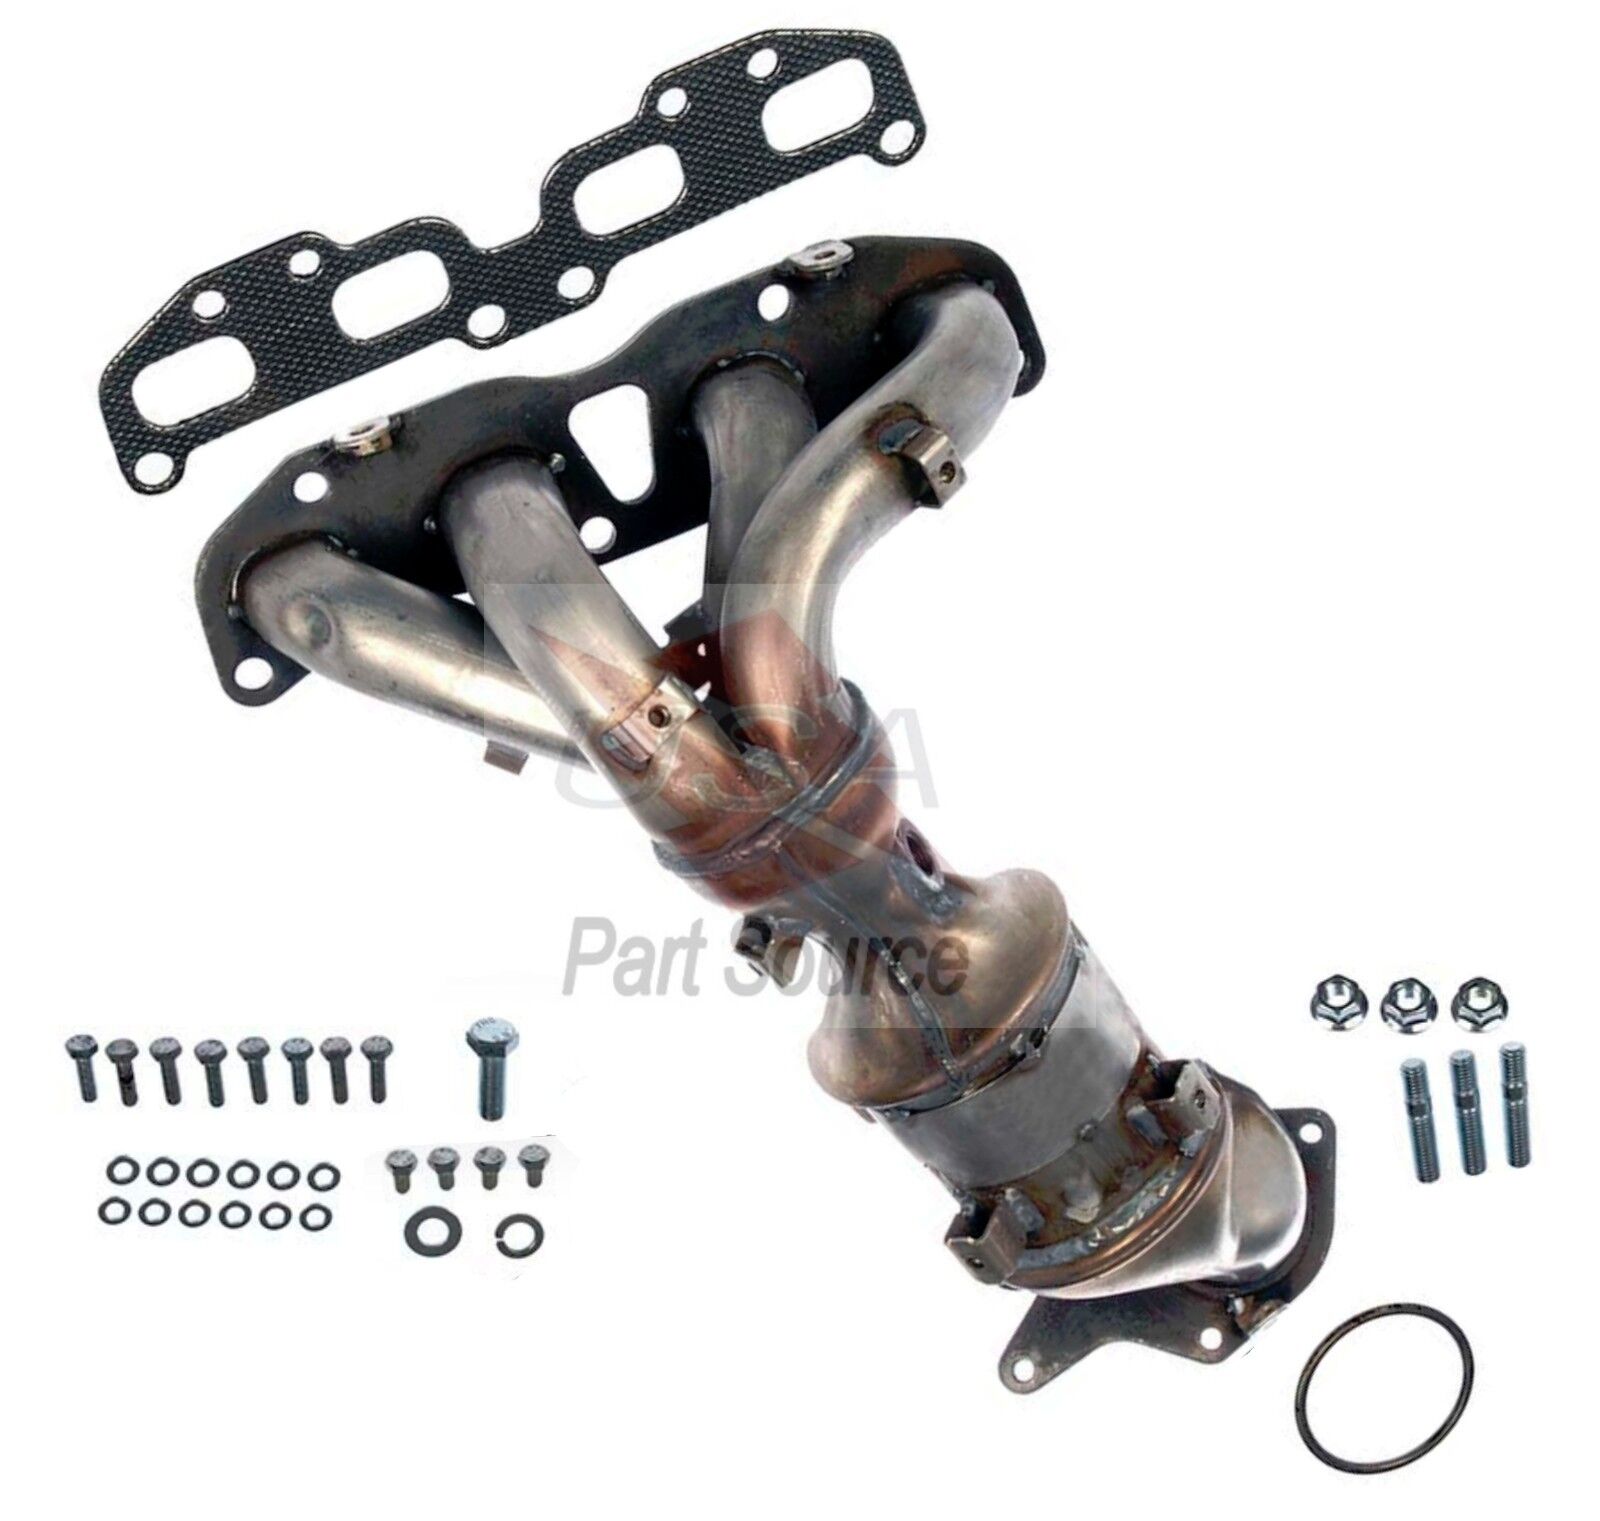 New Exhaust Manifold With Catalytic Converter For 07-13 Nissan Altima 2.5L 